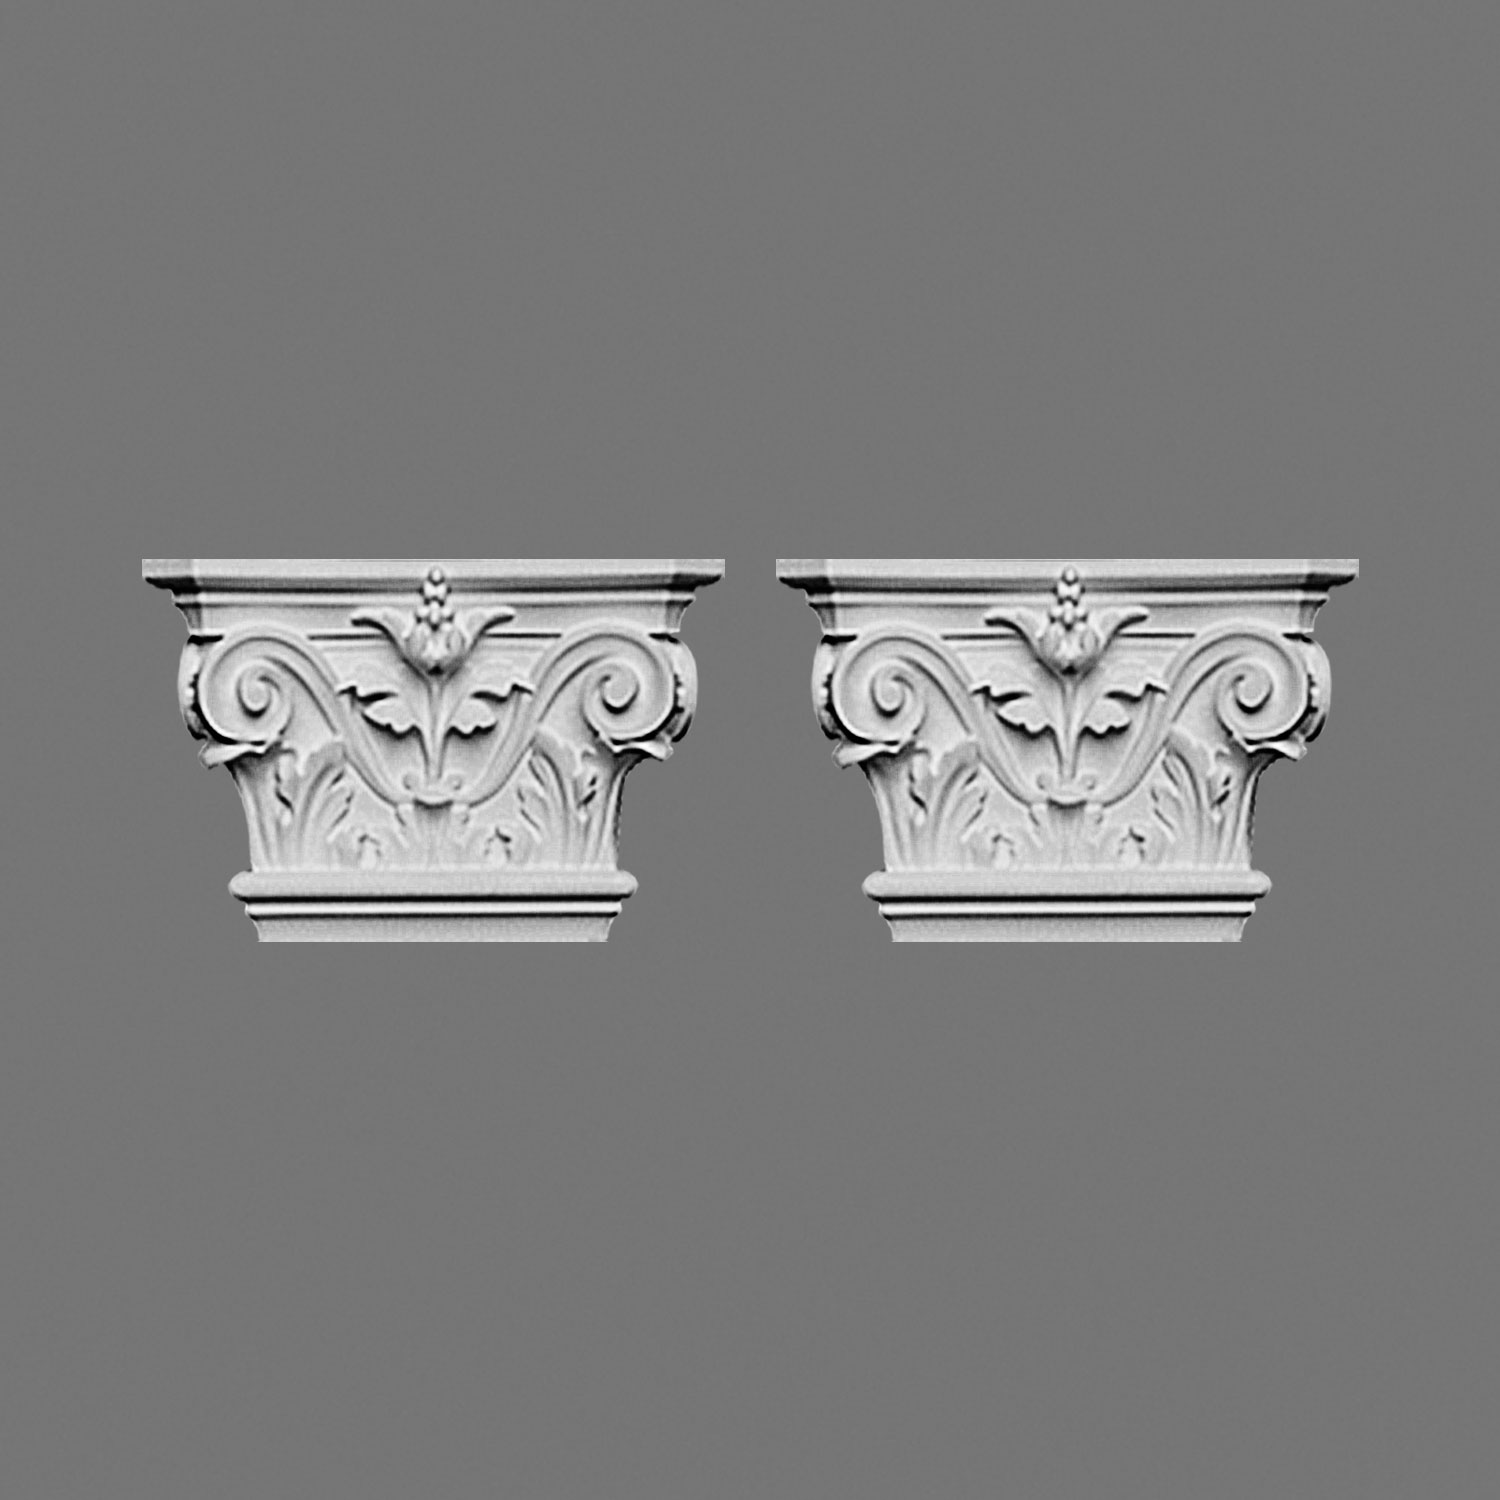 Pair of Capitals for Pilaster